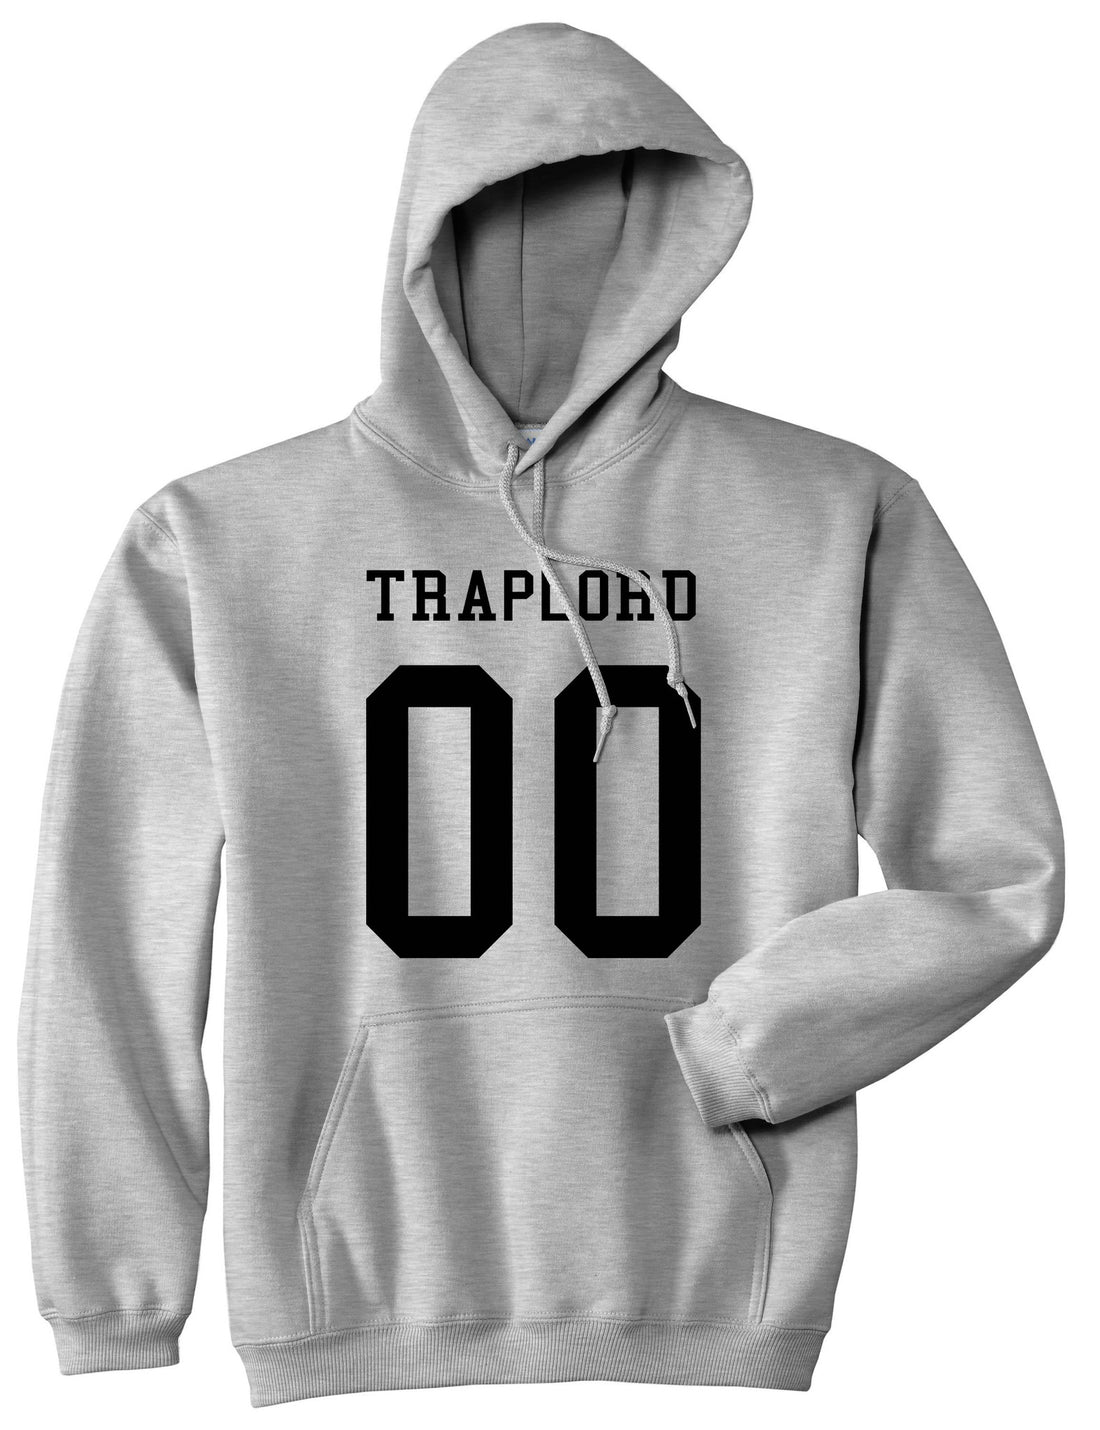 Traplord Team Jersey 00 Trap Lord Pullover Hoodie in Grey By Kings Of NY